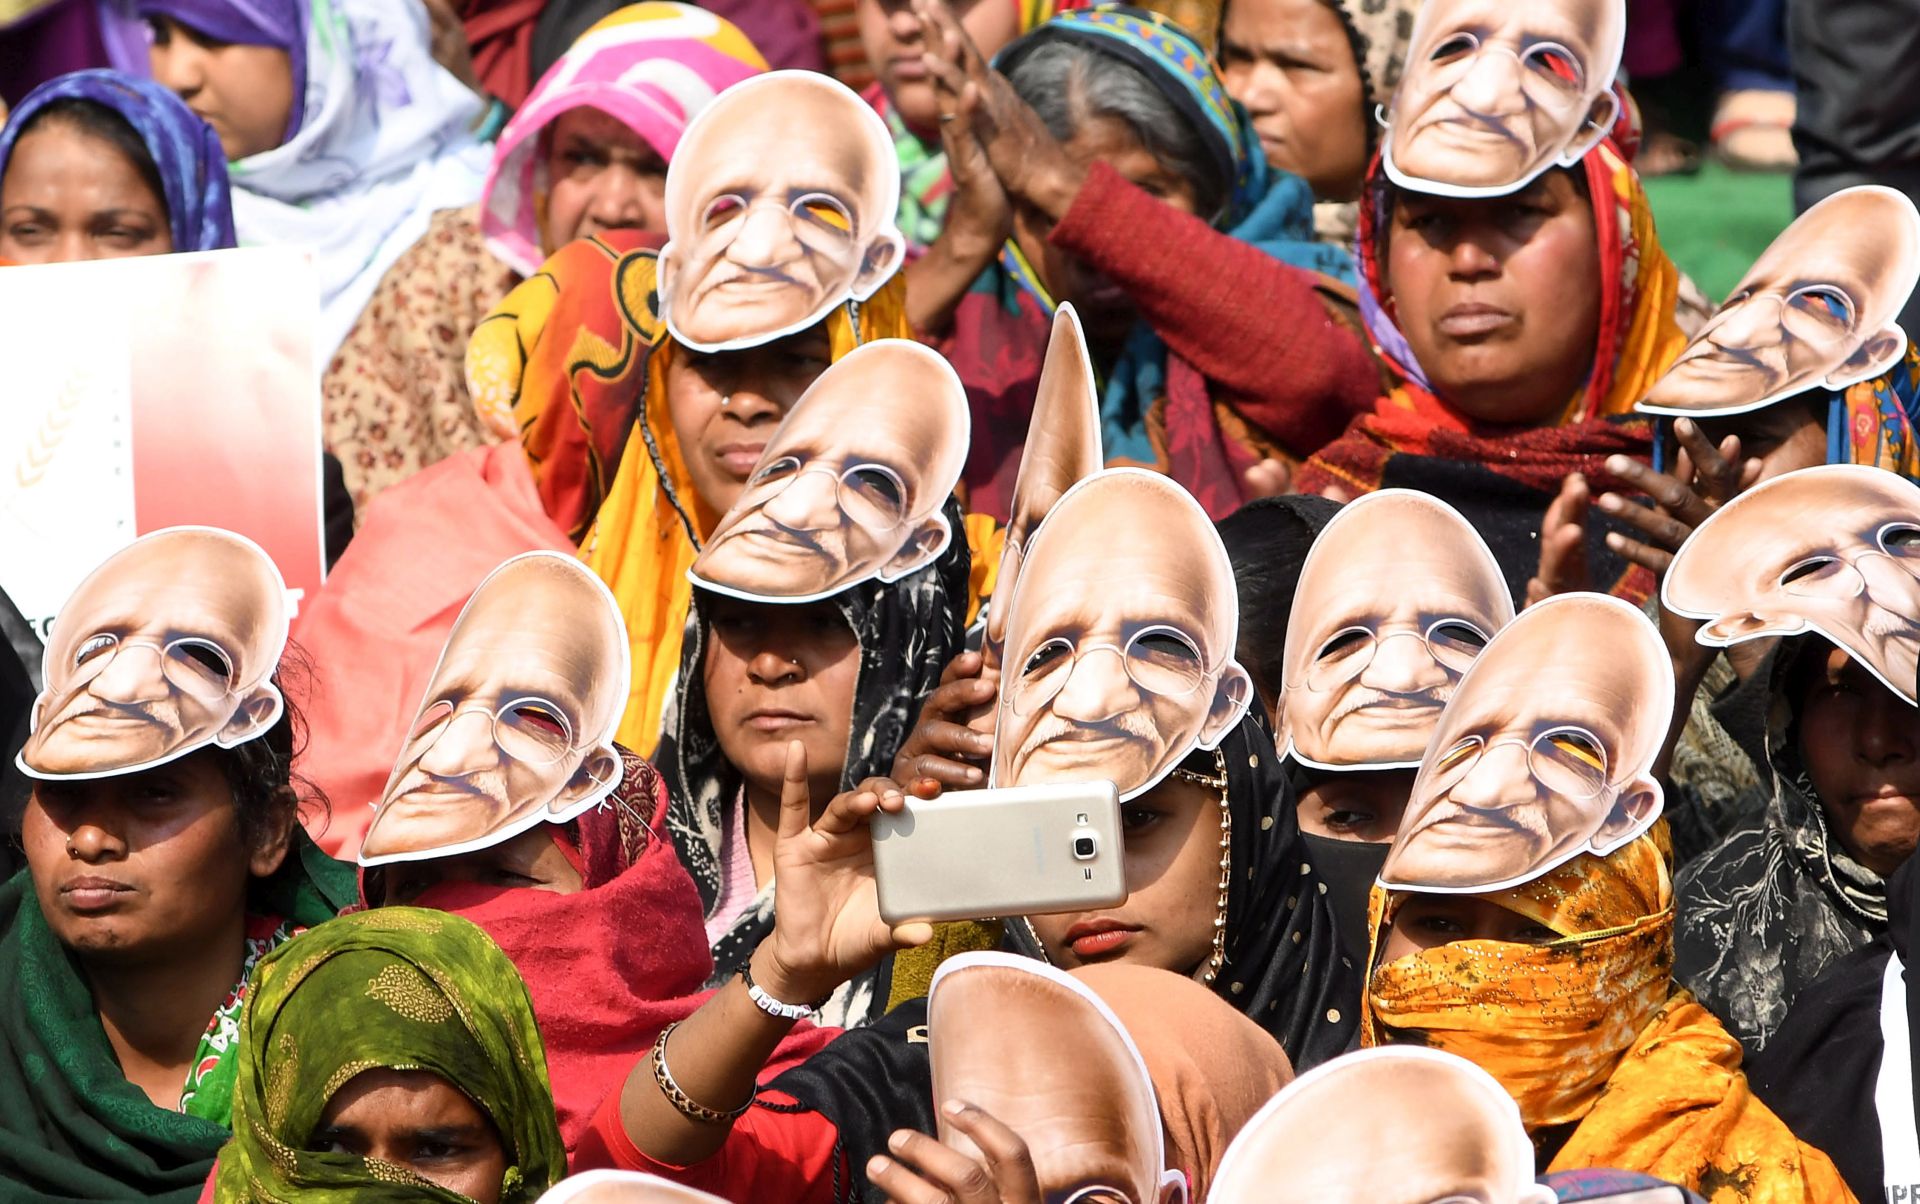 epa08208796 Indian protesters shout slogans wearing masks as they protest against the Citizenship Amendment Act (CAA) and National Register of Citizens (NRC) in New Delhi, India, 10 February 2020.  EPA/STR